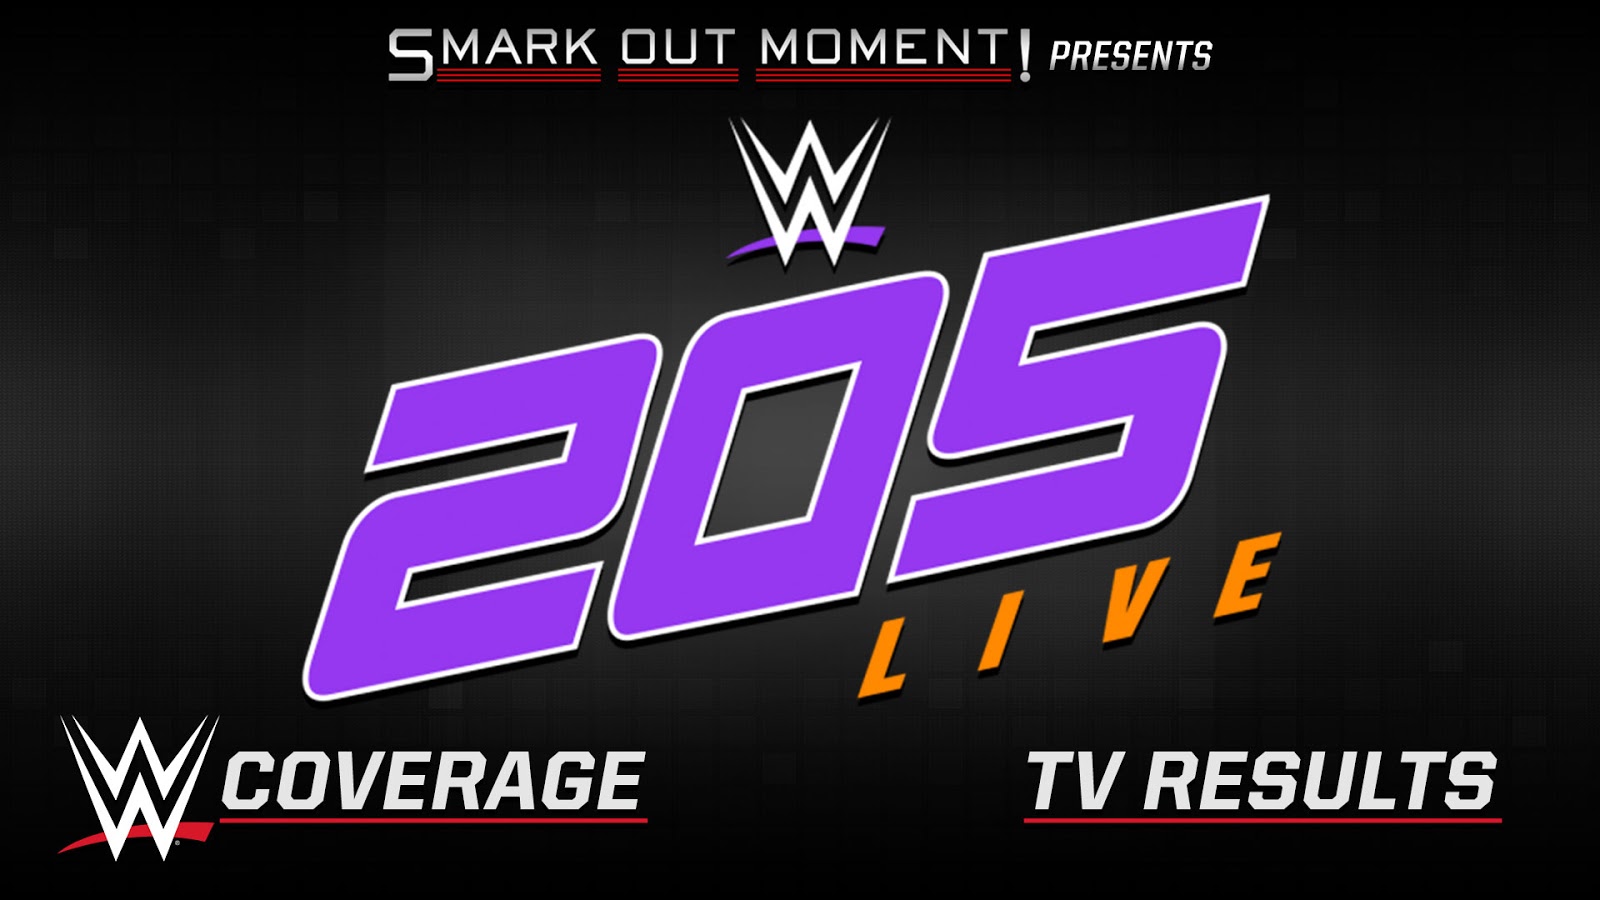 Spoilers Wwe 205 Live Episodes Online Results - Graphic Design - HD Wallpaper 